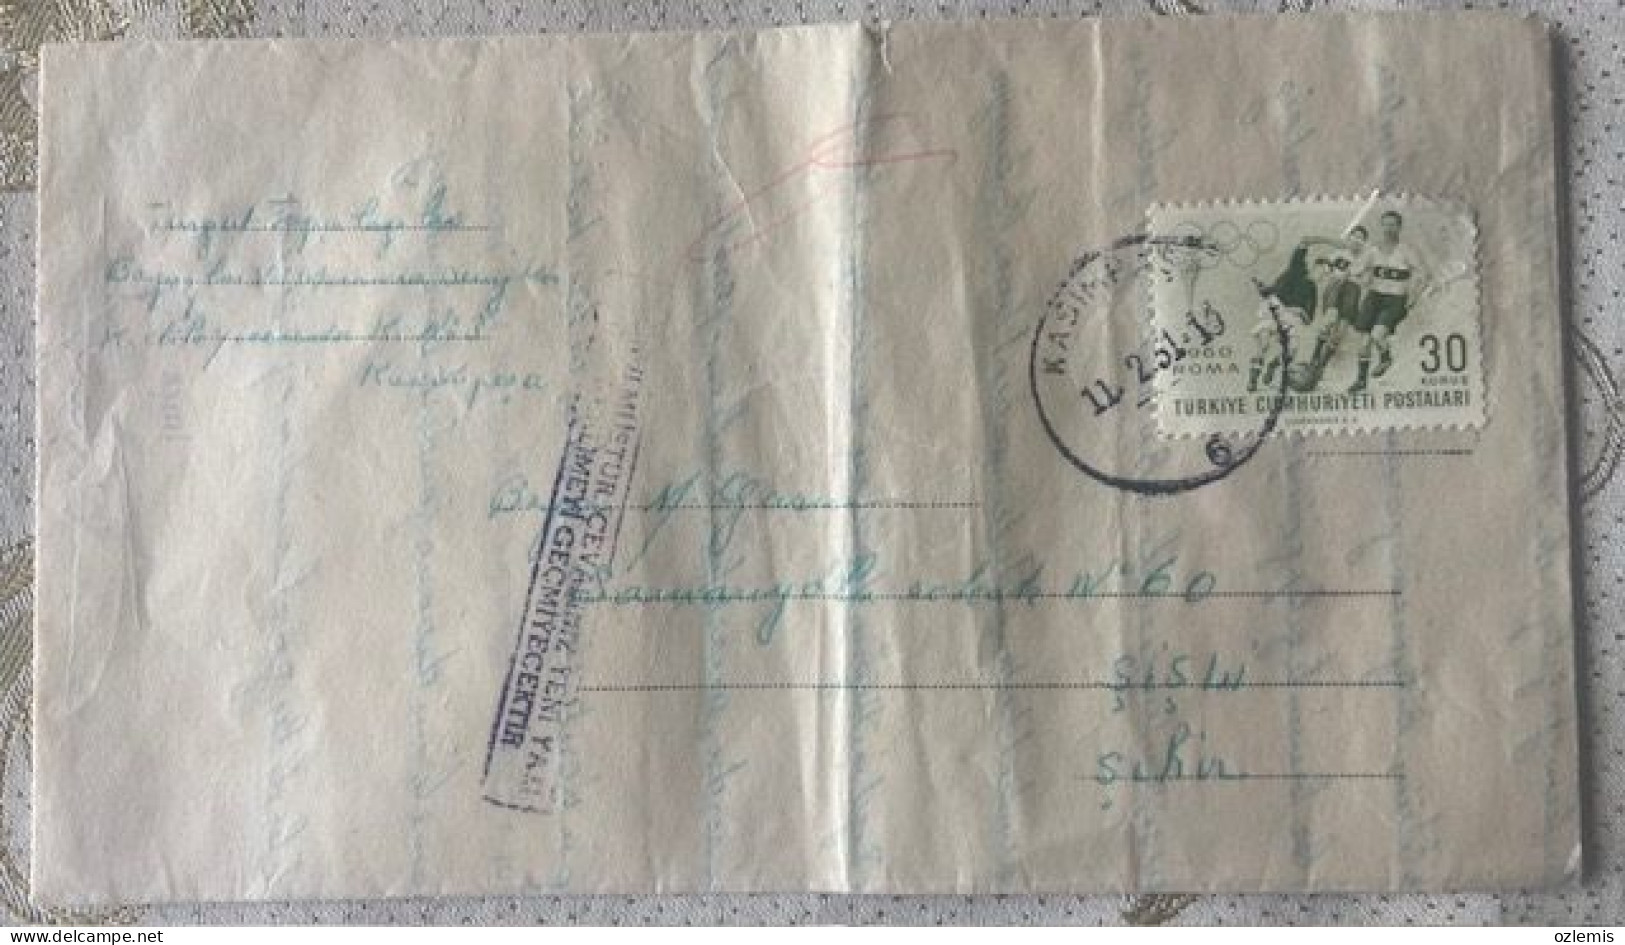 TURKEY,TURKEI,TURQUIE , ISTANBUL,TO ISTANBUL .1961,SOLIDER MAIL,  COVER - Briefe U. Dokumente